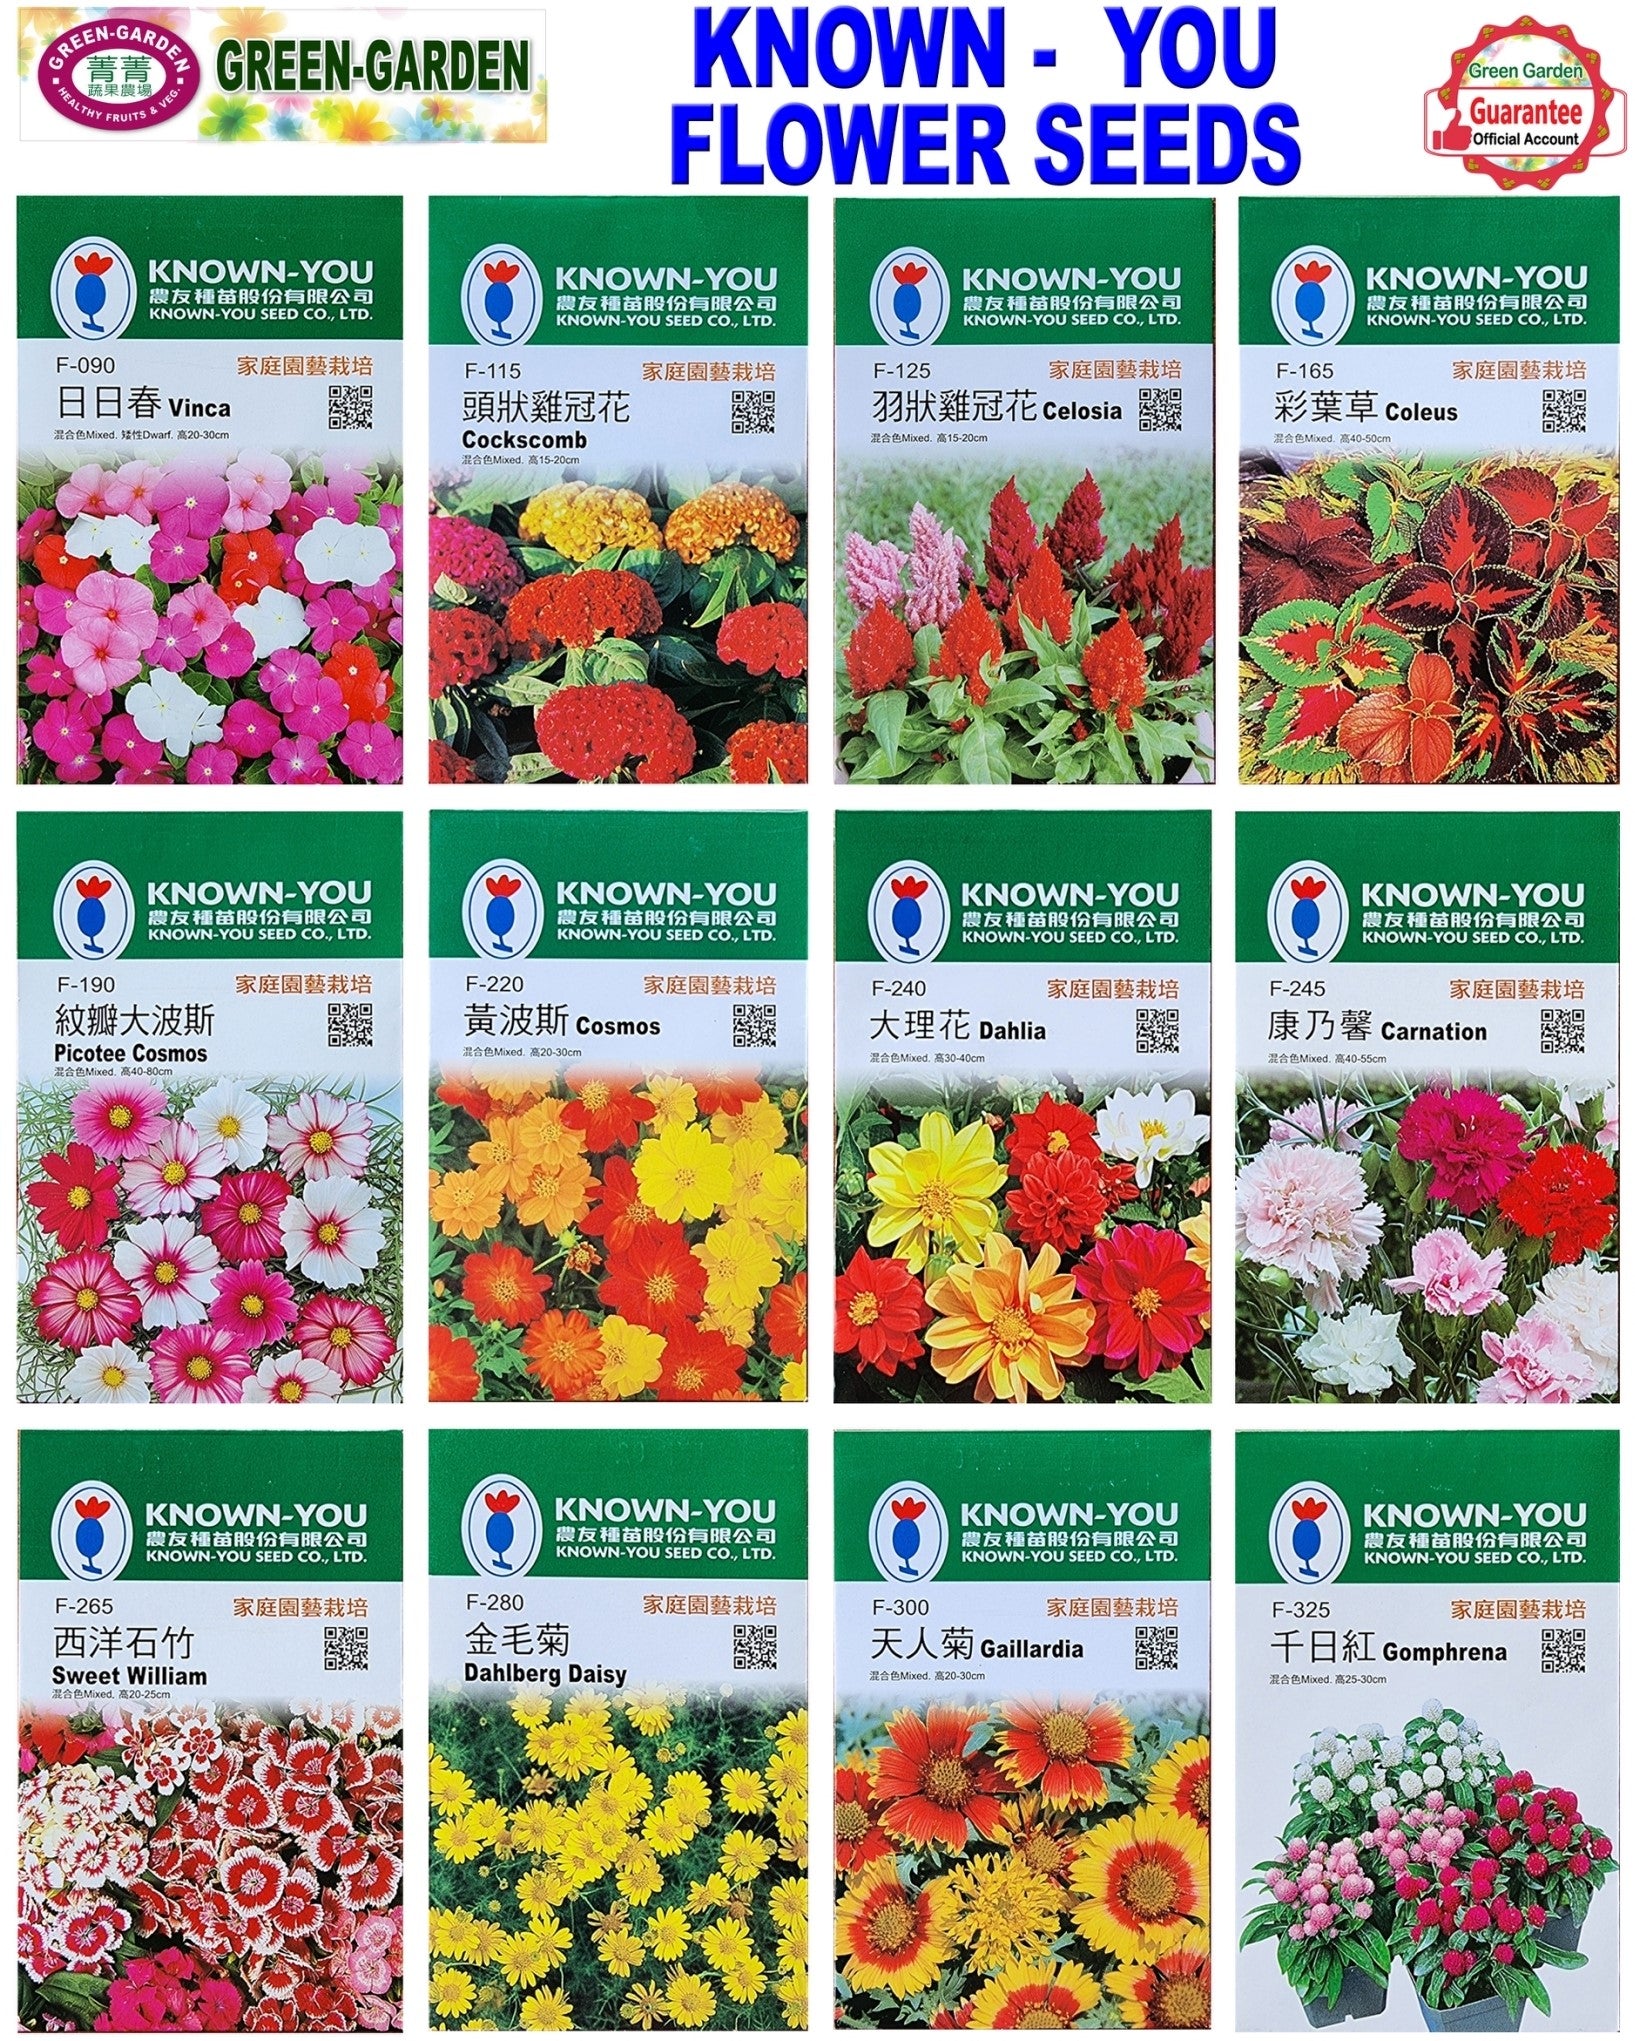 Known You Flower Seeds (F-325 Gomphrena)